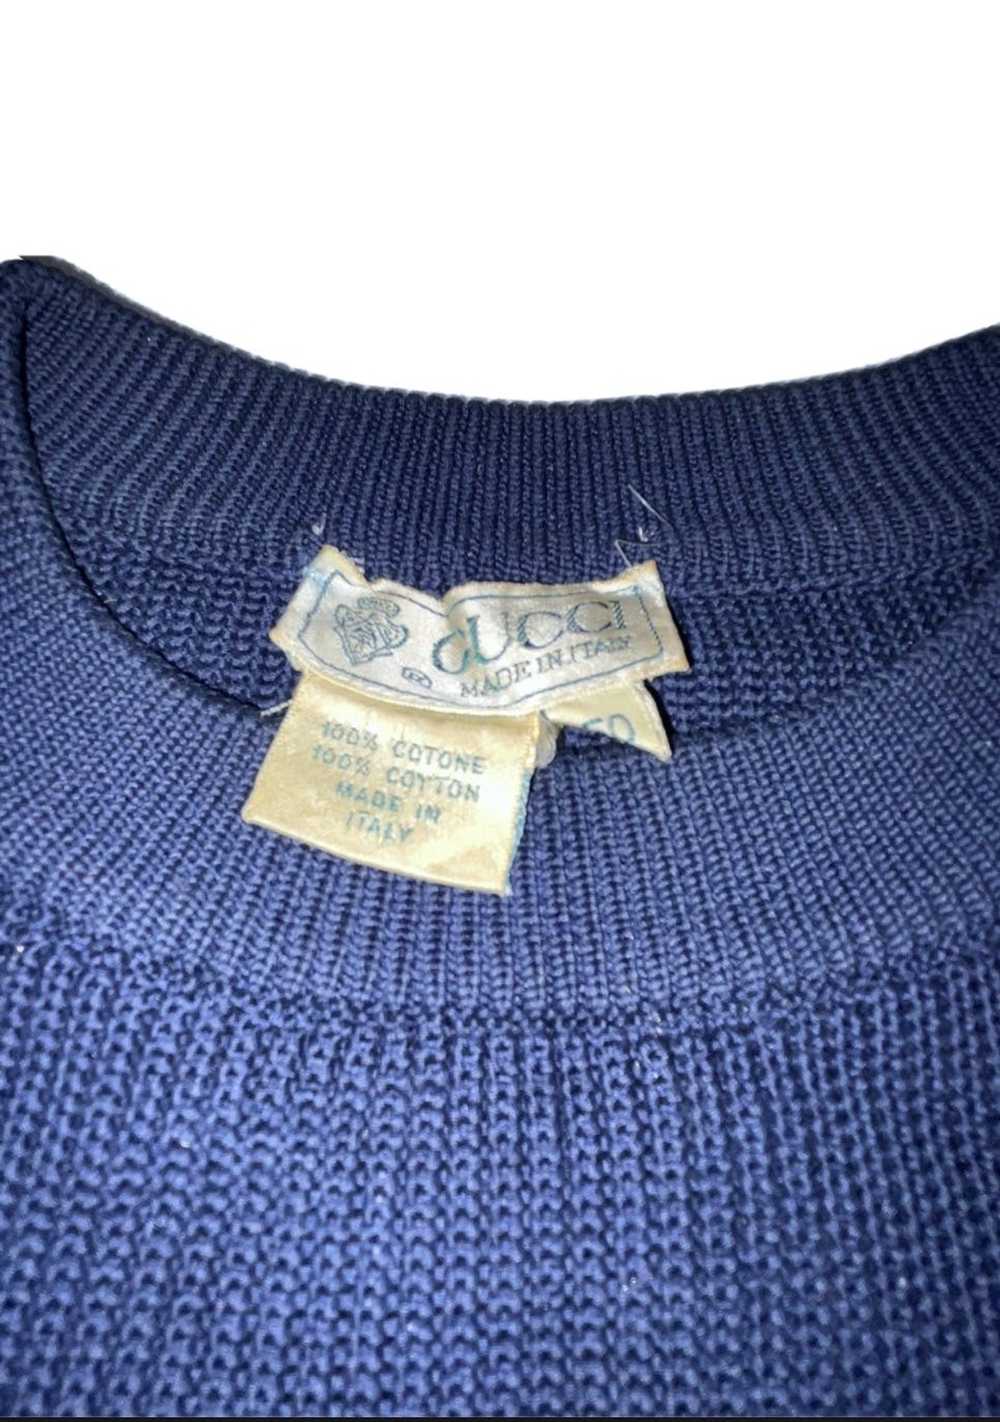 Gucci × Vintage Vintage Gucci sweater from 80s - image 3